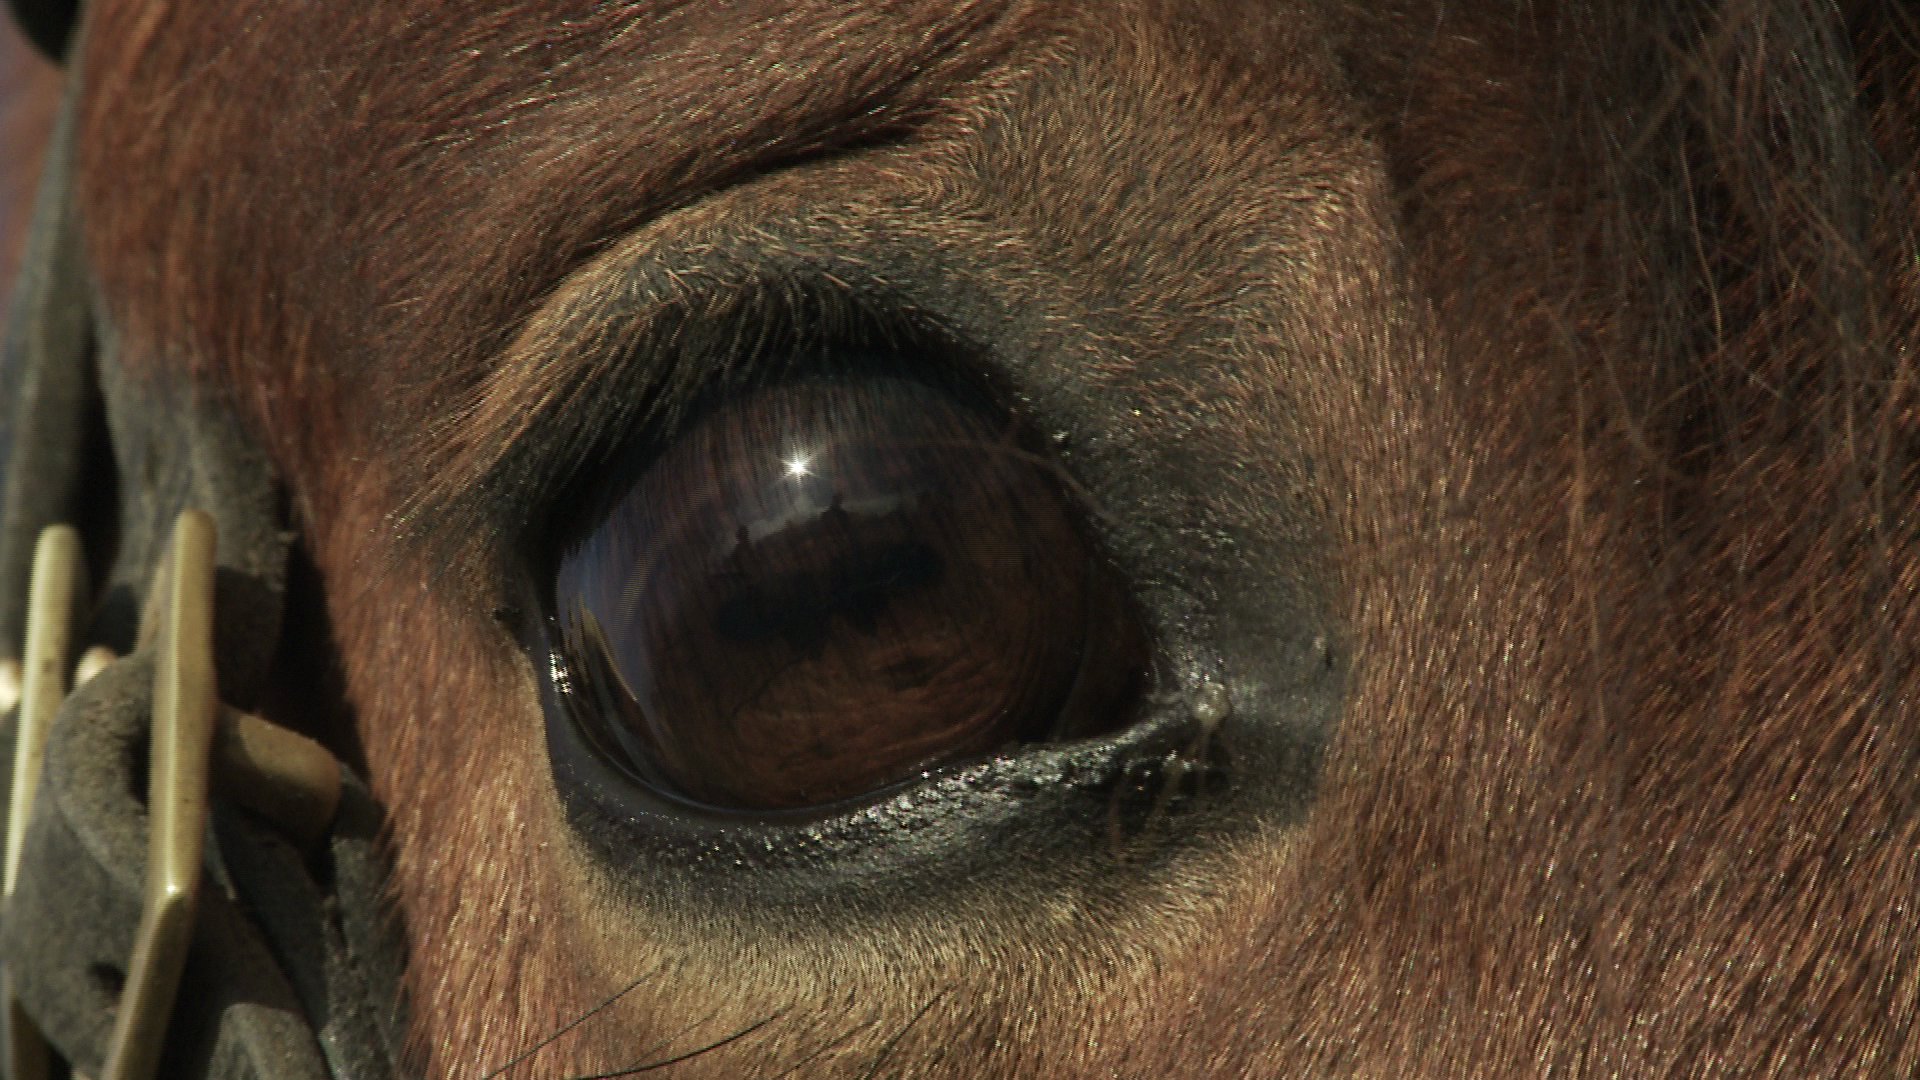 Documentary THE FREEDOM OF THE HEART: Horses are masters in reading gestures.